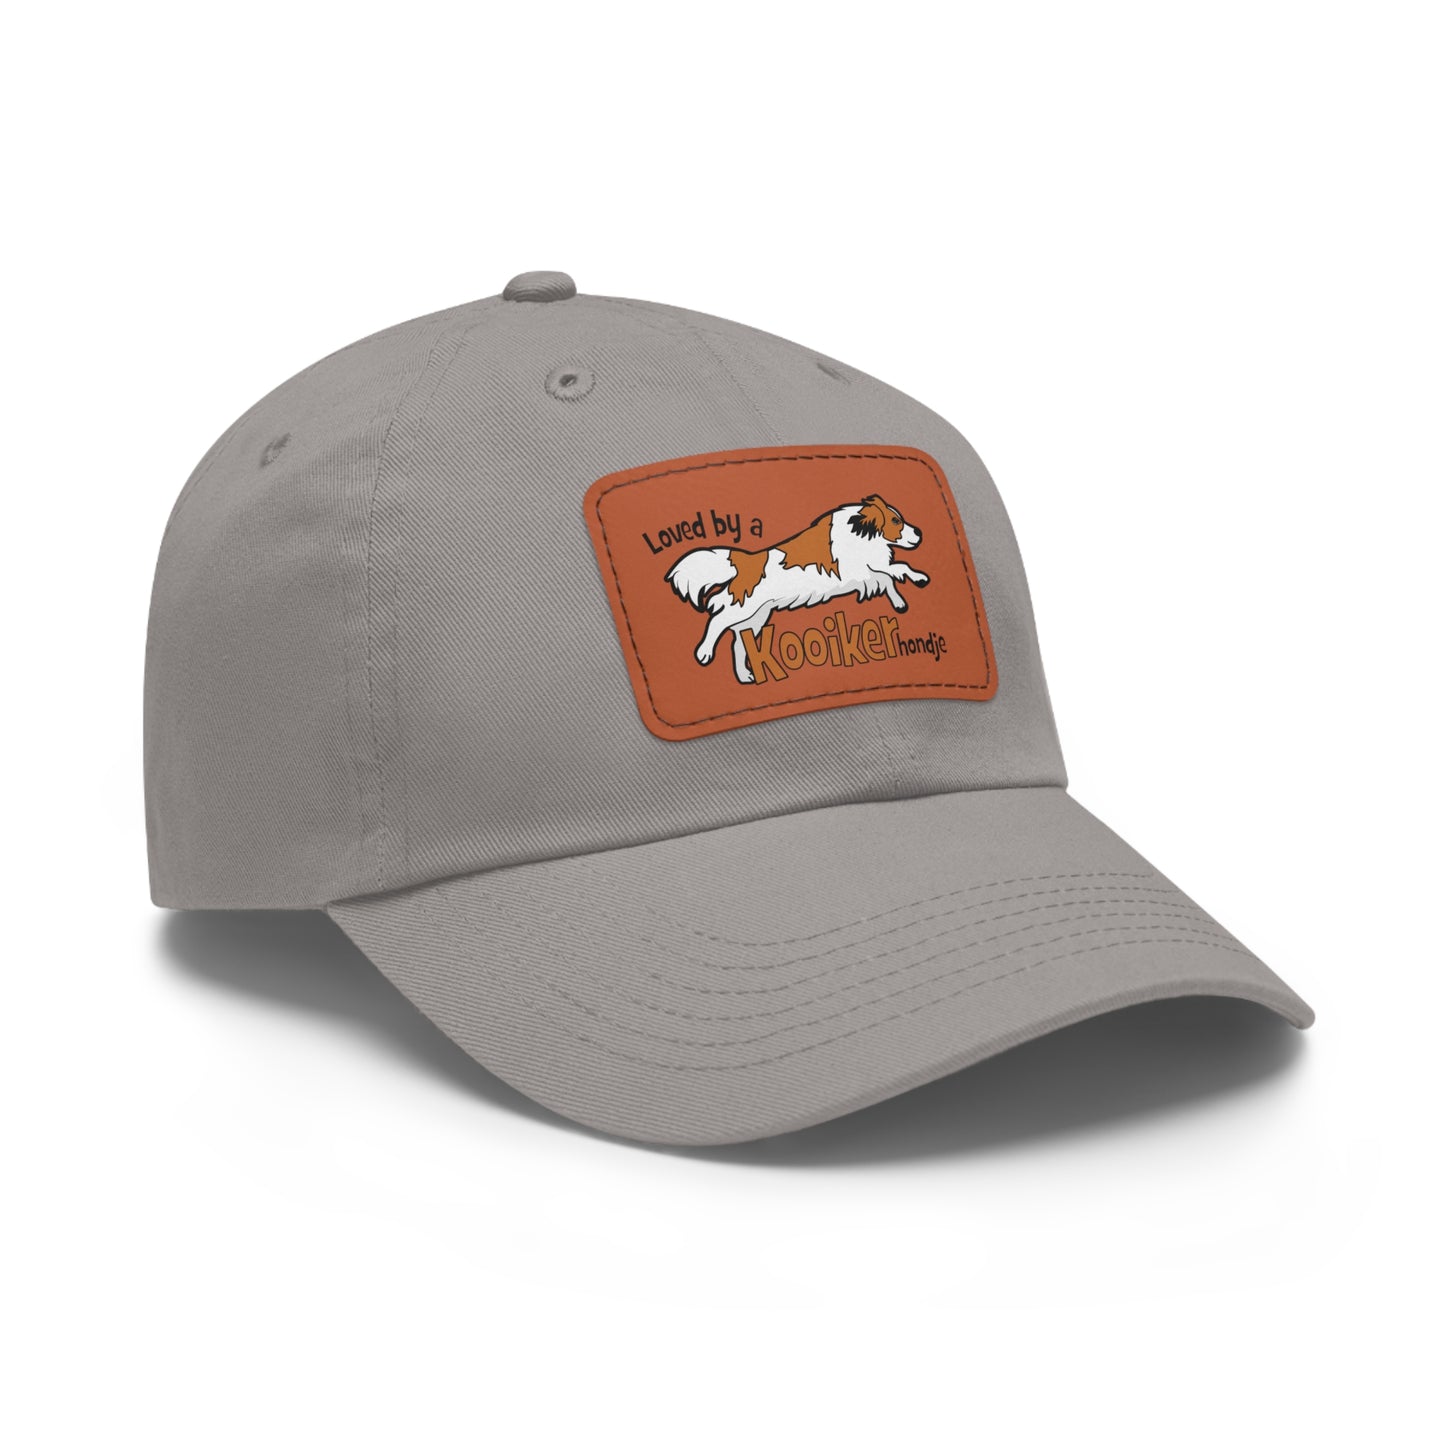 KOOIKER Dad Hat with Leather Patch